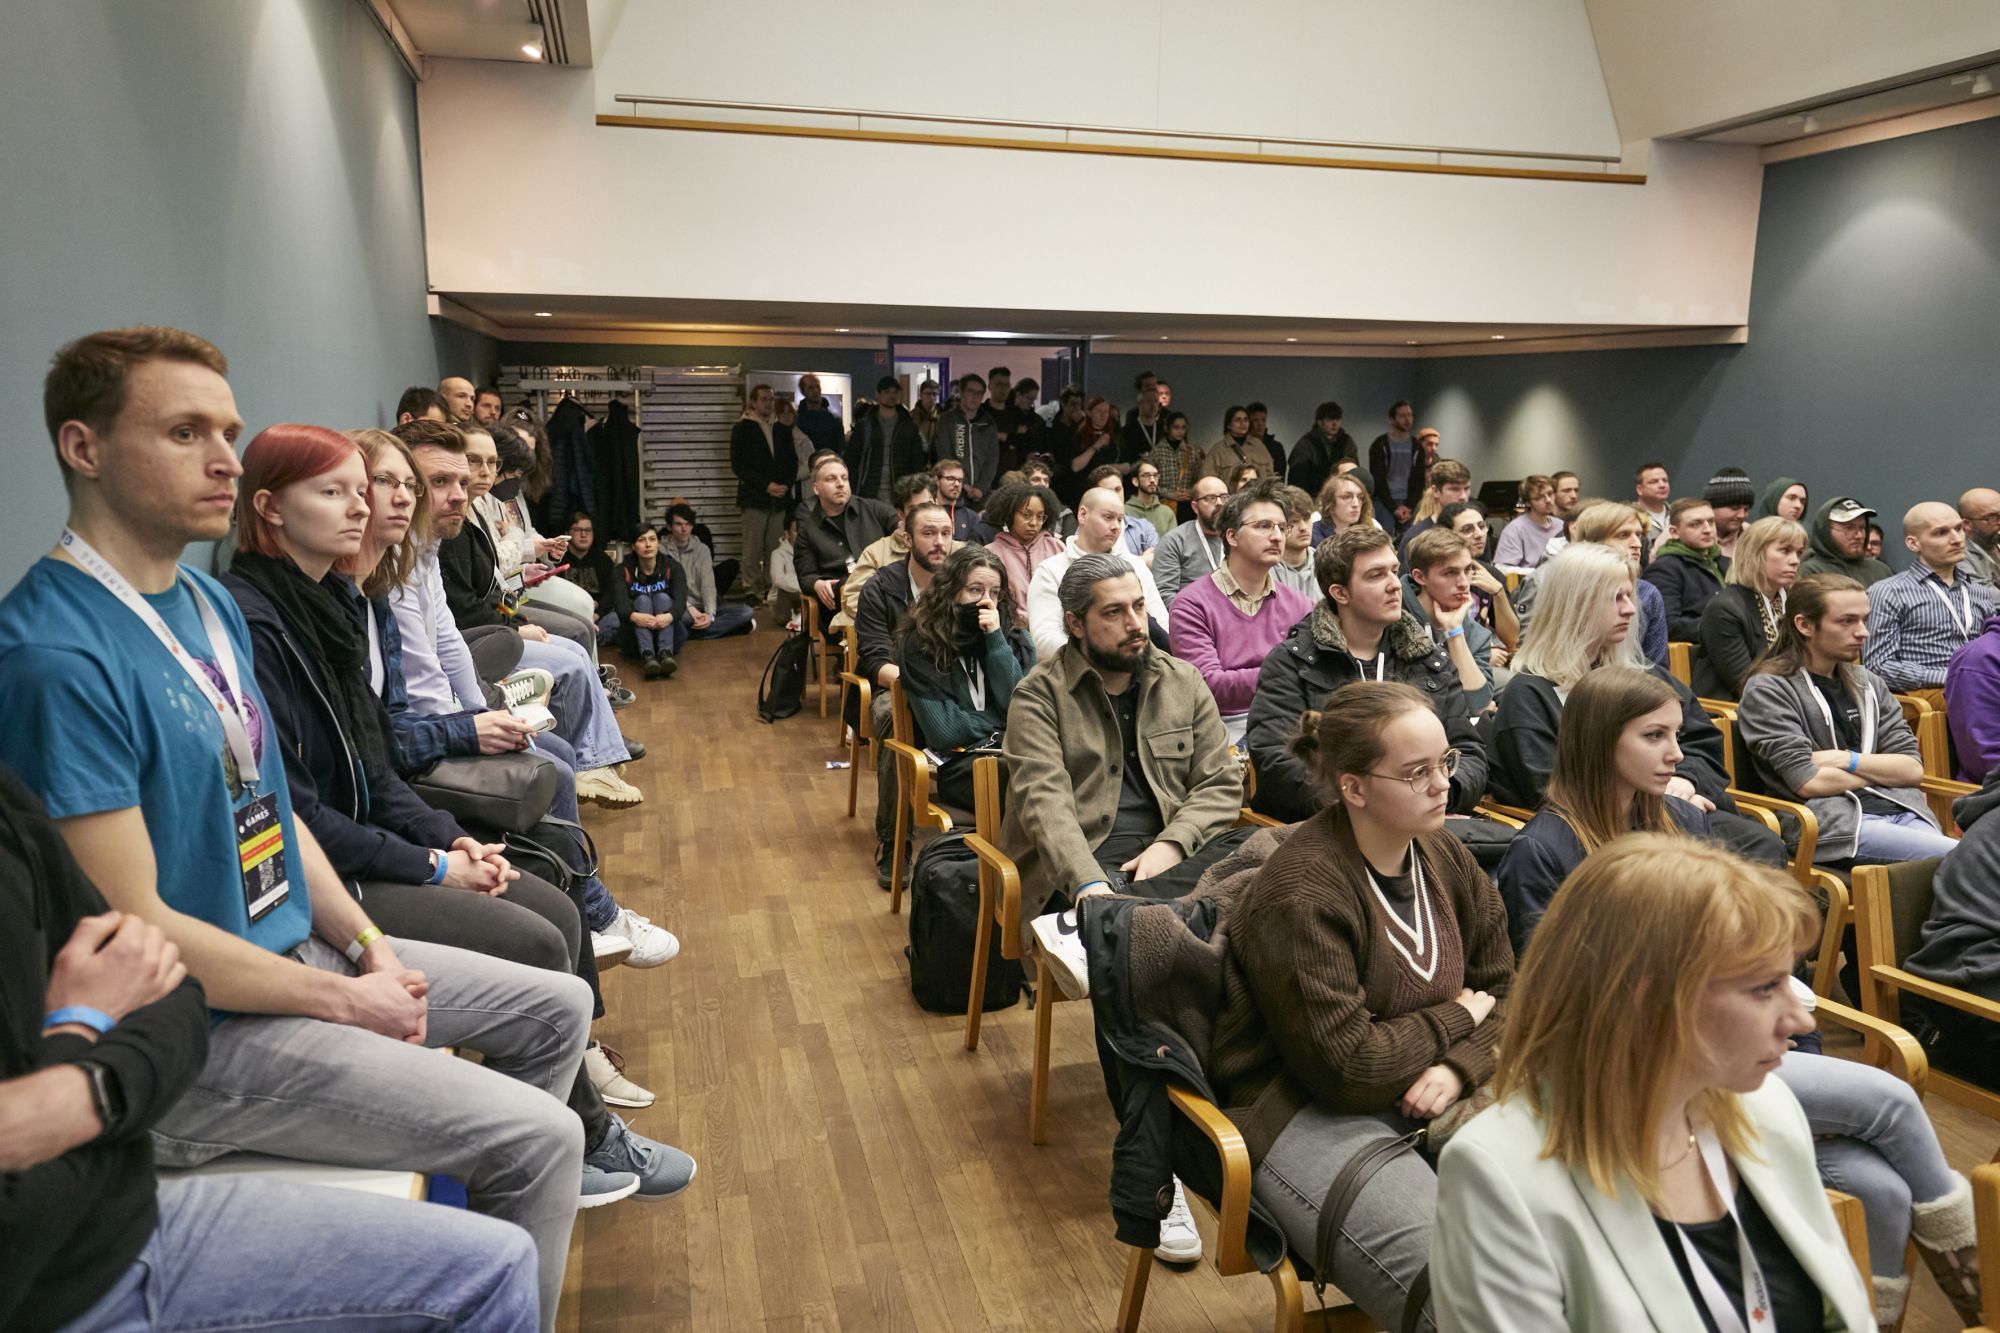 Conference audience in the second lecture hall | Photo by Rolf Otzipka